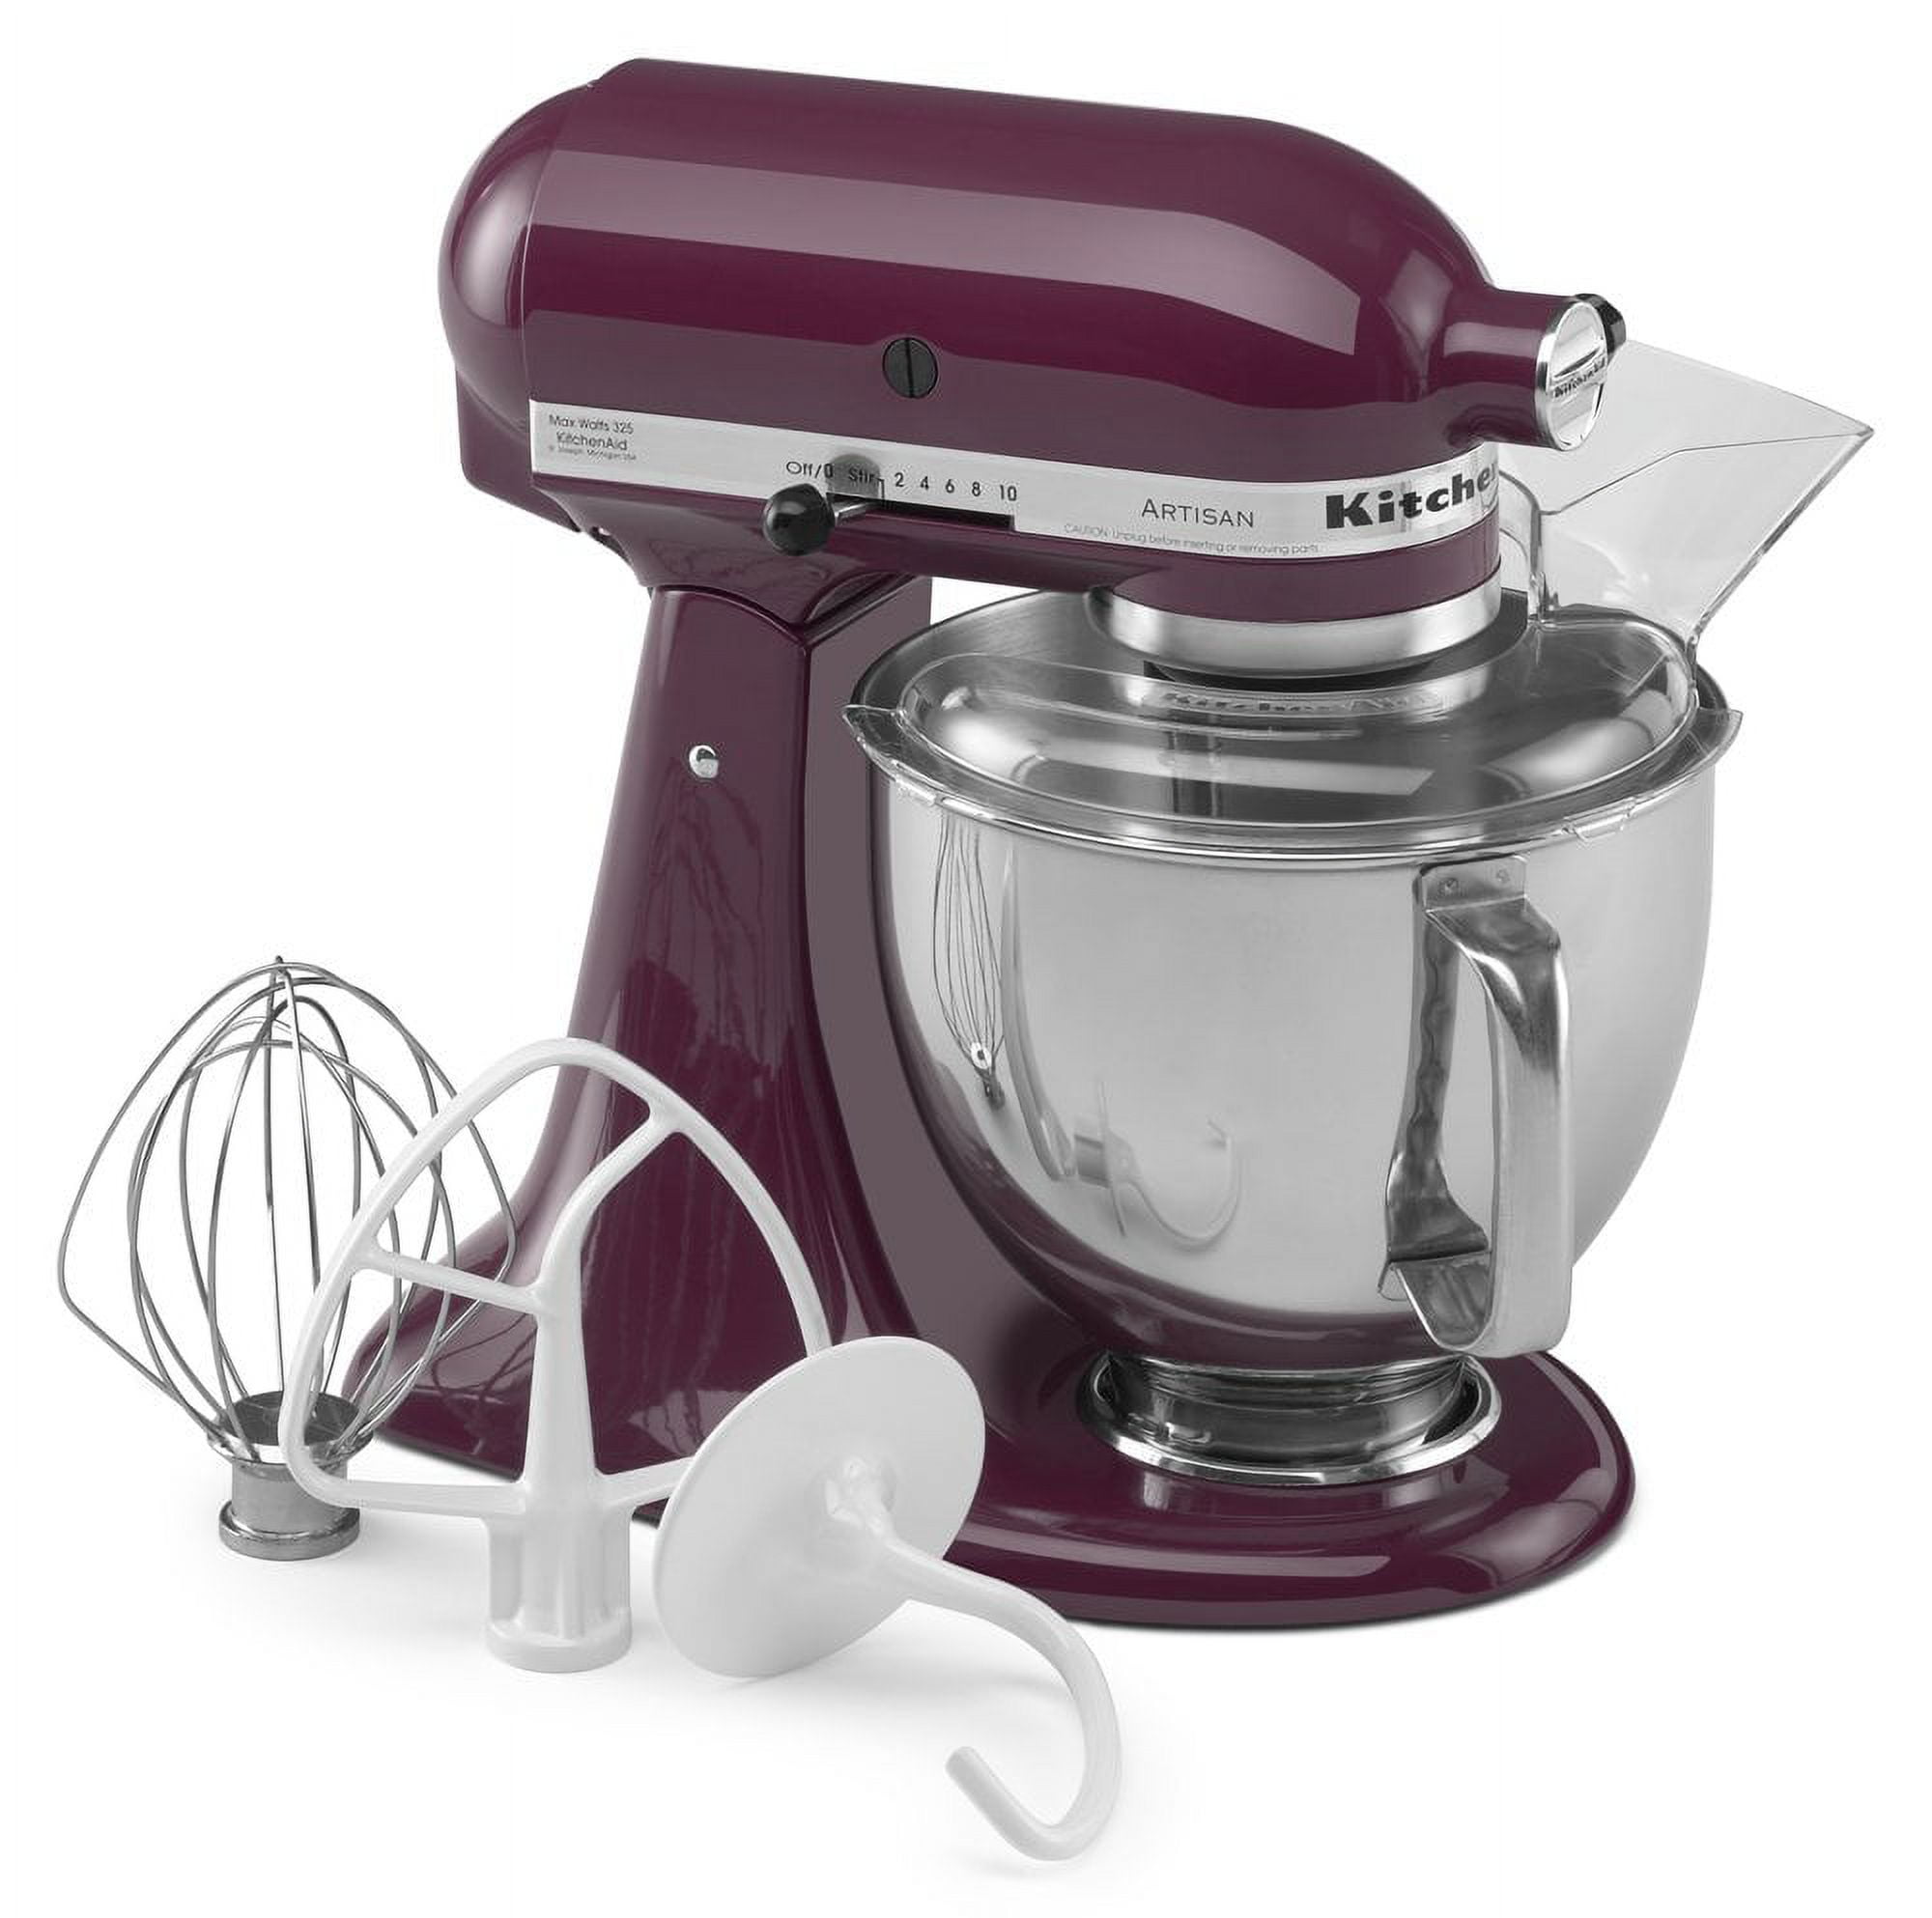  KitchenAid KSM150PSCB Artisan Series 5-Qt. Stand Mixer with  Pouring Shield - Cranberry: Electric Stand Mixers: Home & Kitchen